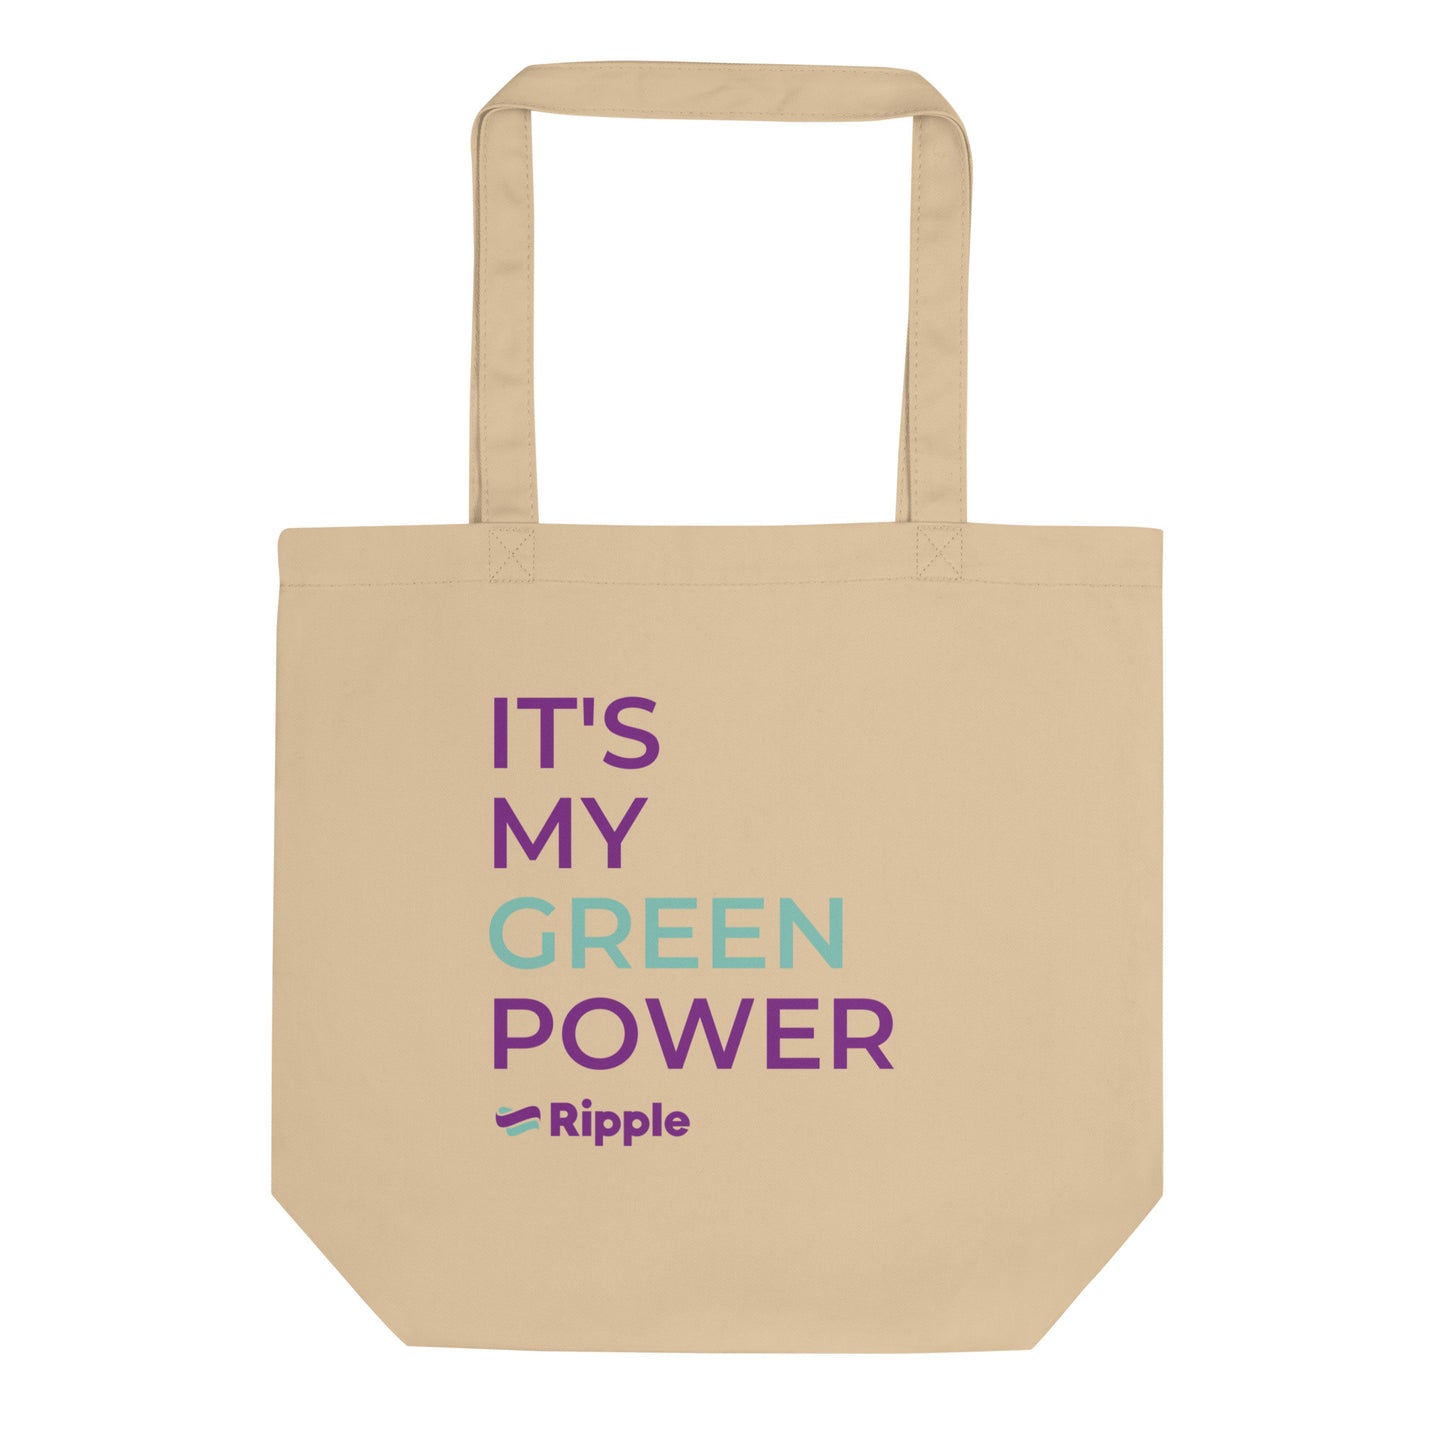 'It's my green power' eco tote bag